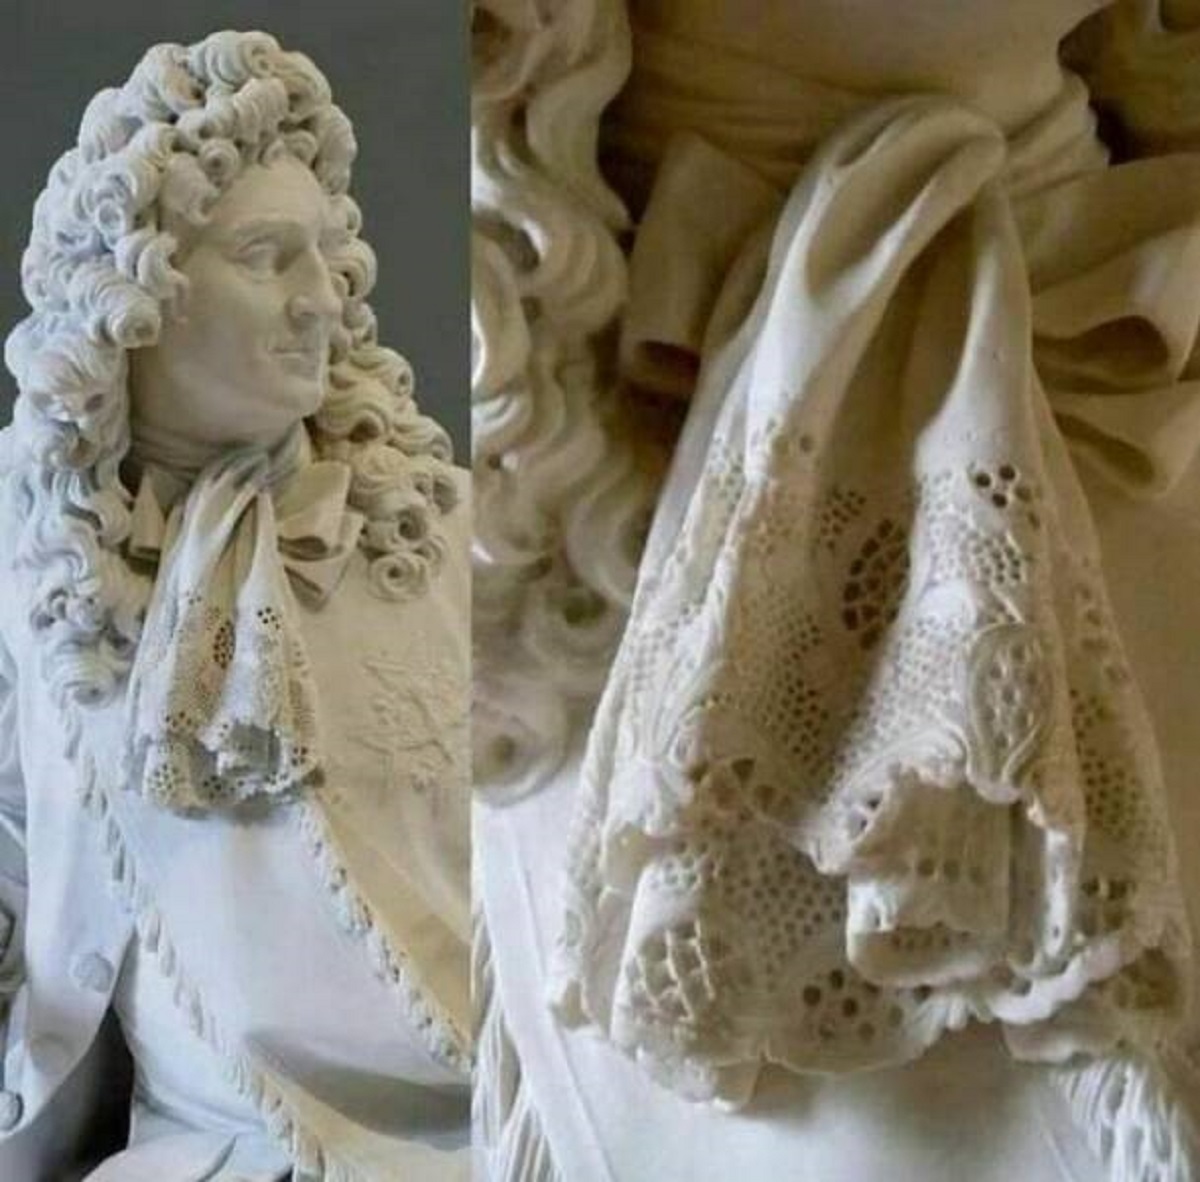 "Pictured Above Is The Marble Lace Neckerchief Carved By French Sculptor Louis-Philippe Mouchy (1734 - 1801), Who Masterfully Created The Marble Statue In 1781"